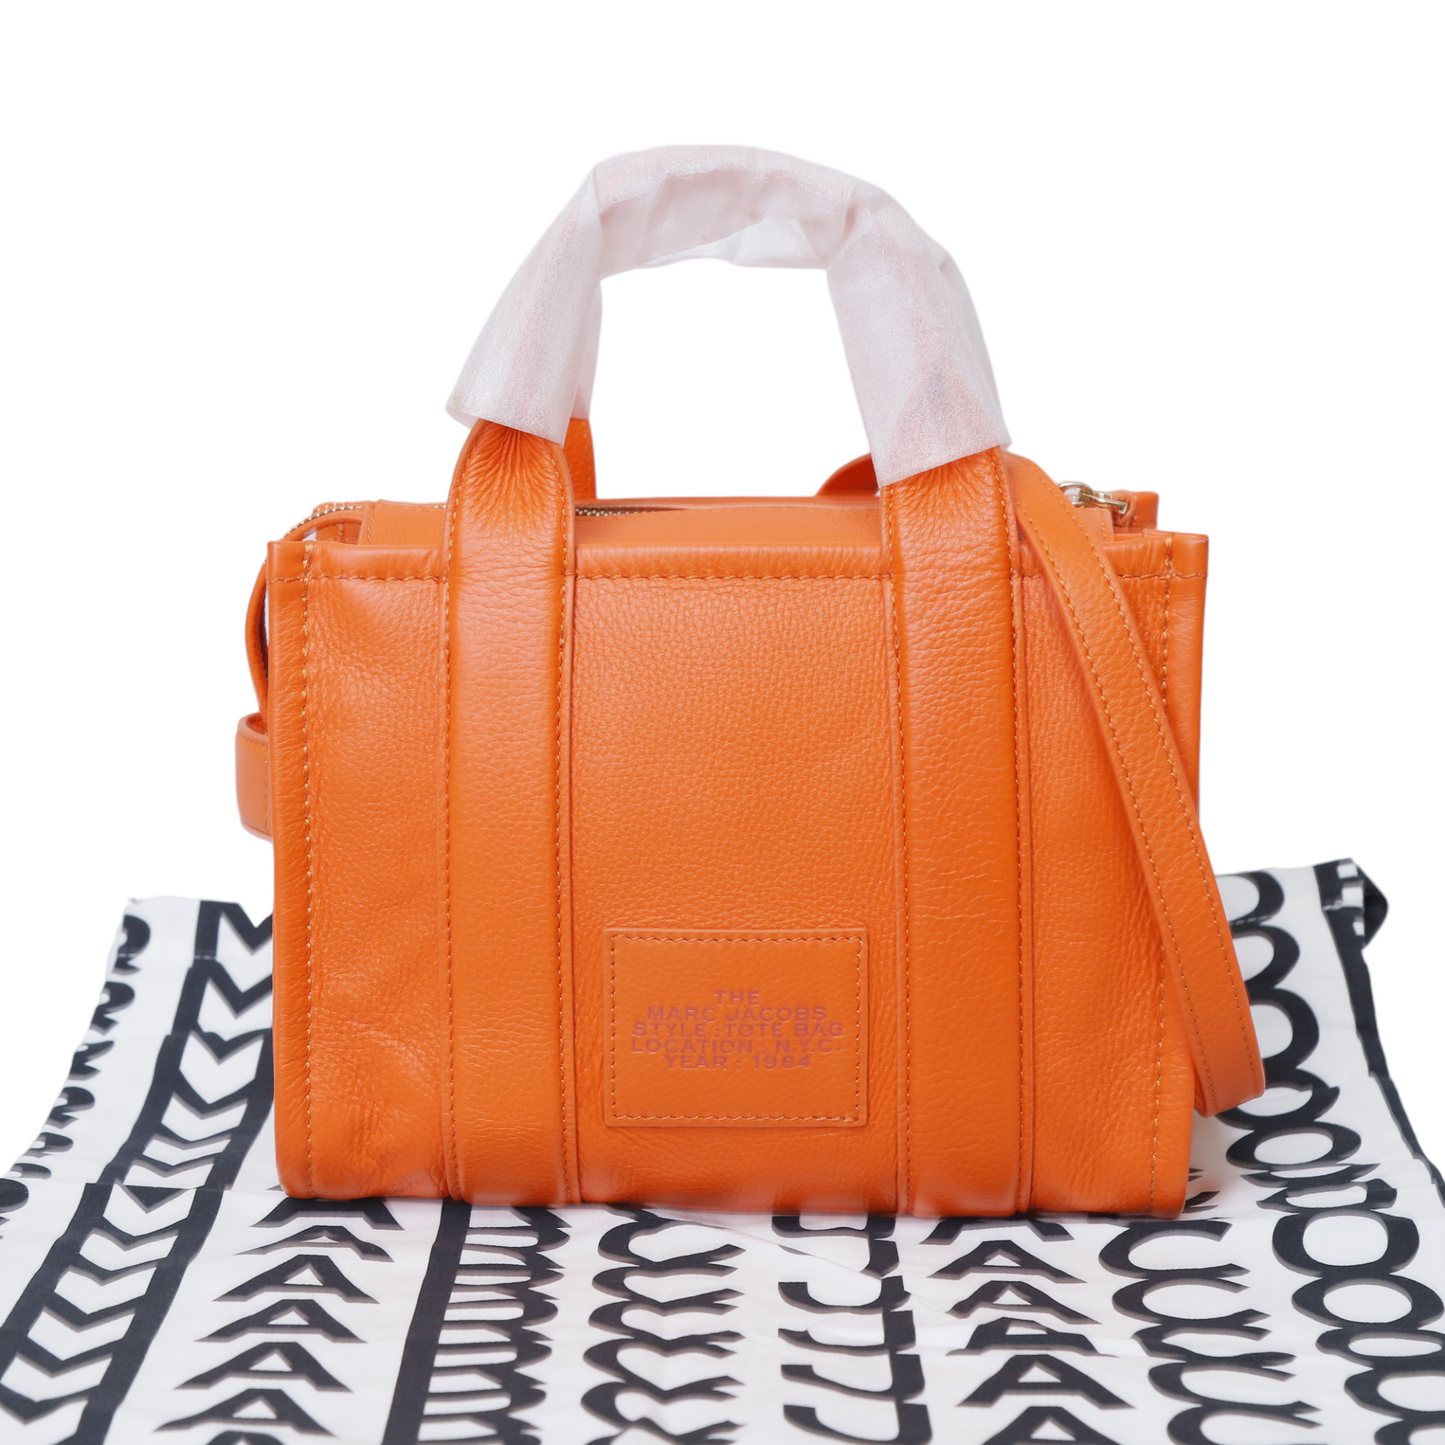 Marc Jacobs Orange Leather The Tote Bag